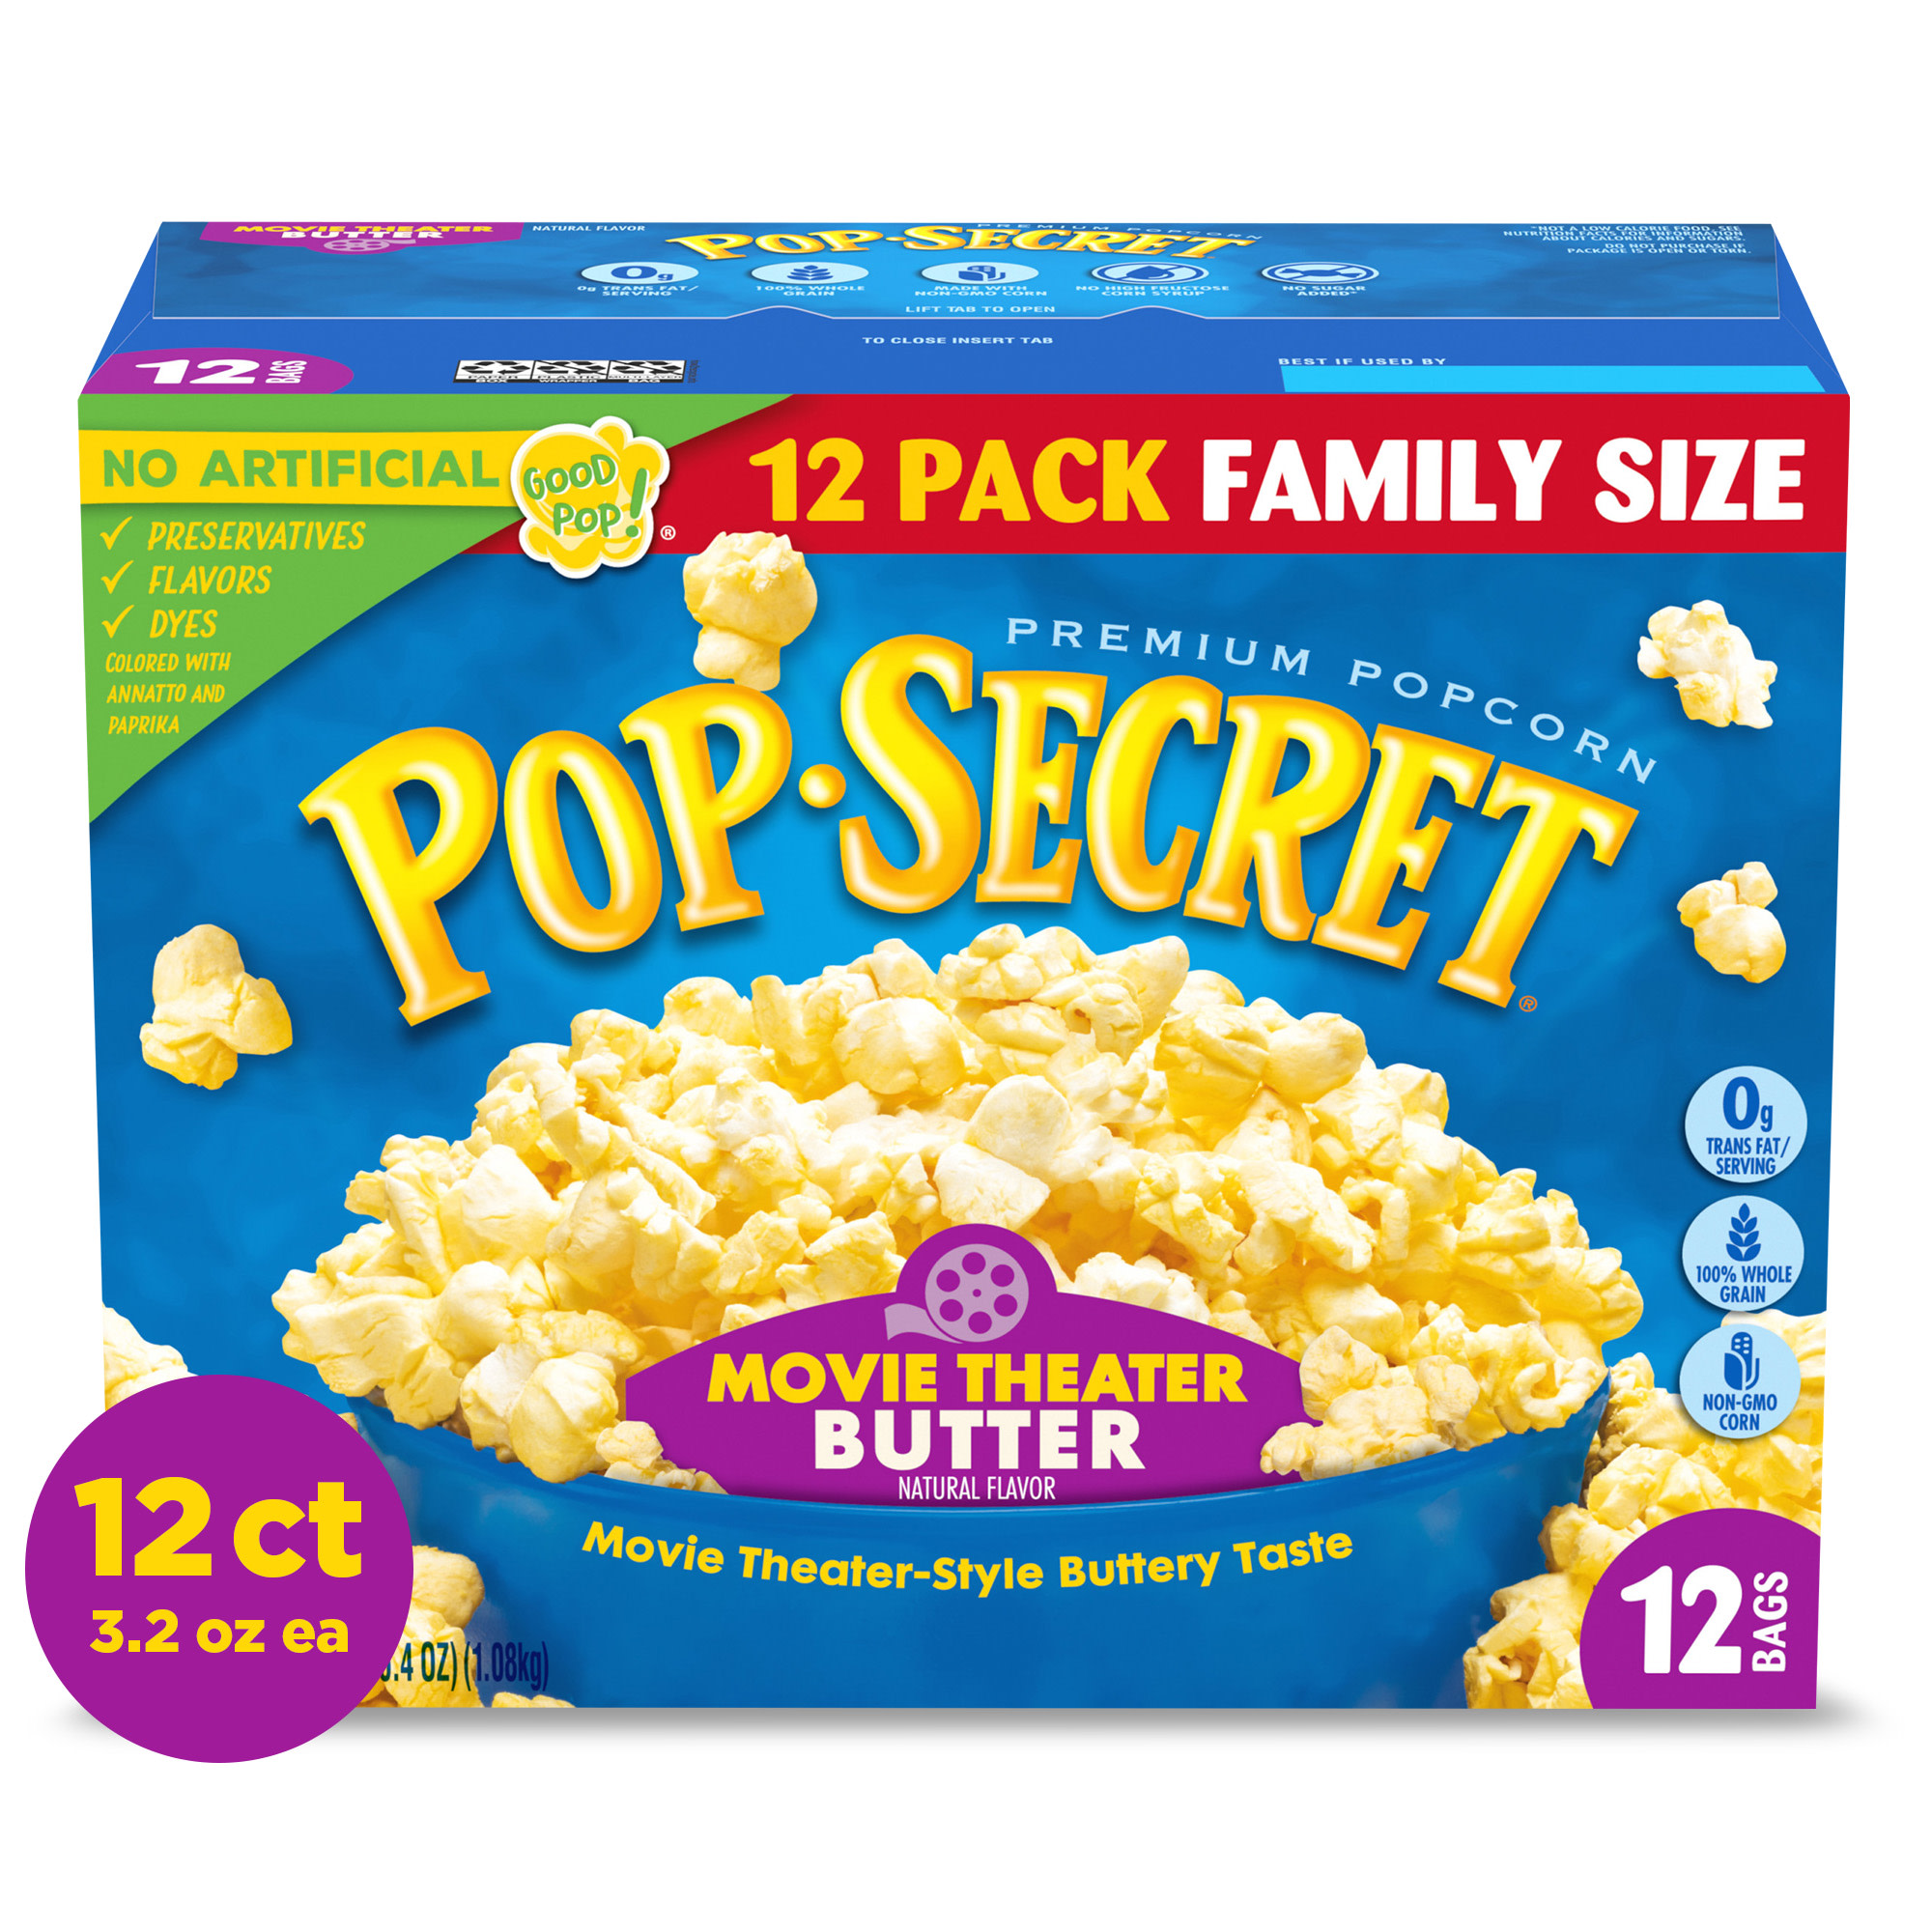 Pop Secret Microwave Popcorn, Movie Theater Butter, Flavor, 3 oz Sharing Bags, 12 Ct - image 1 of 10